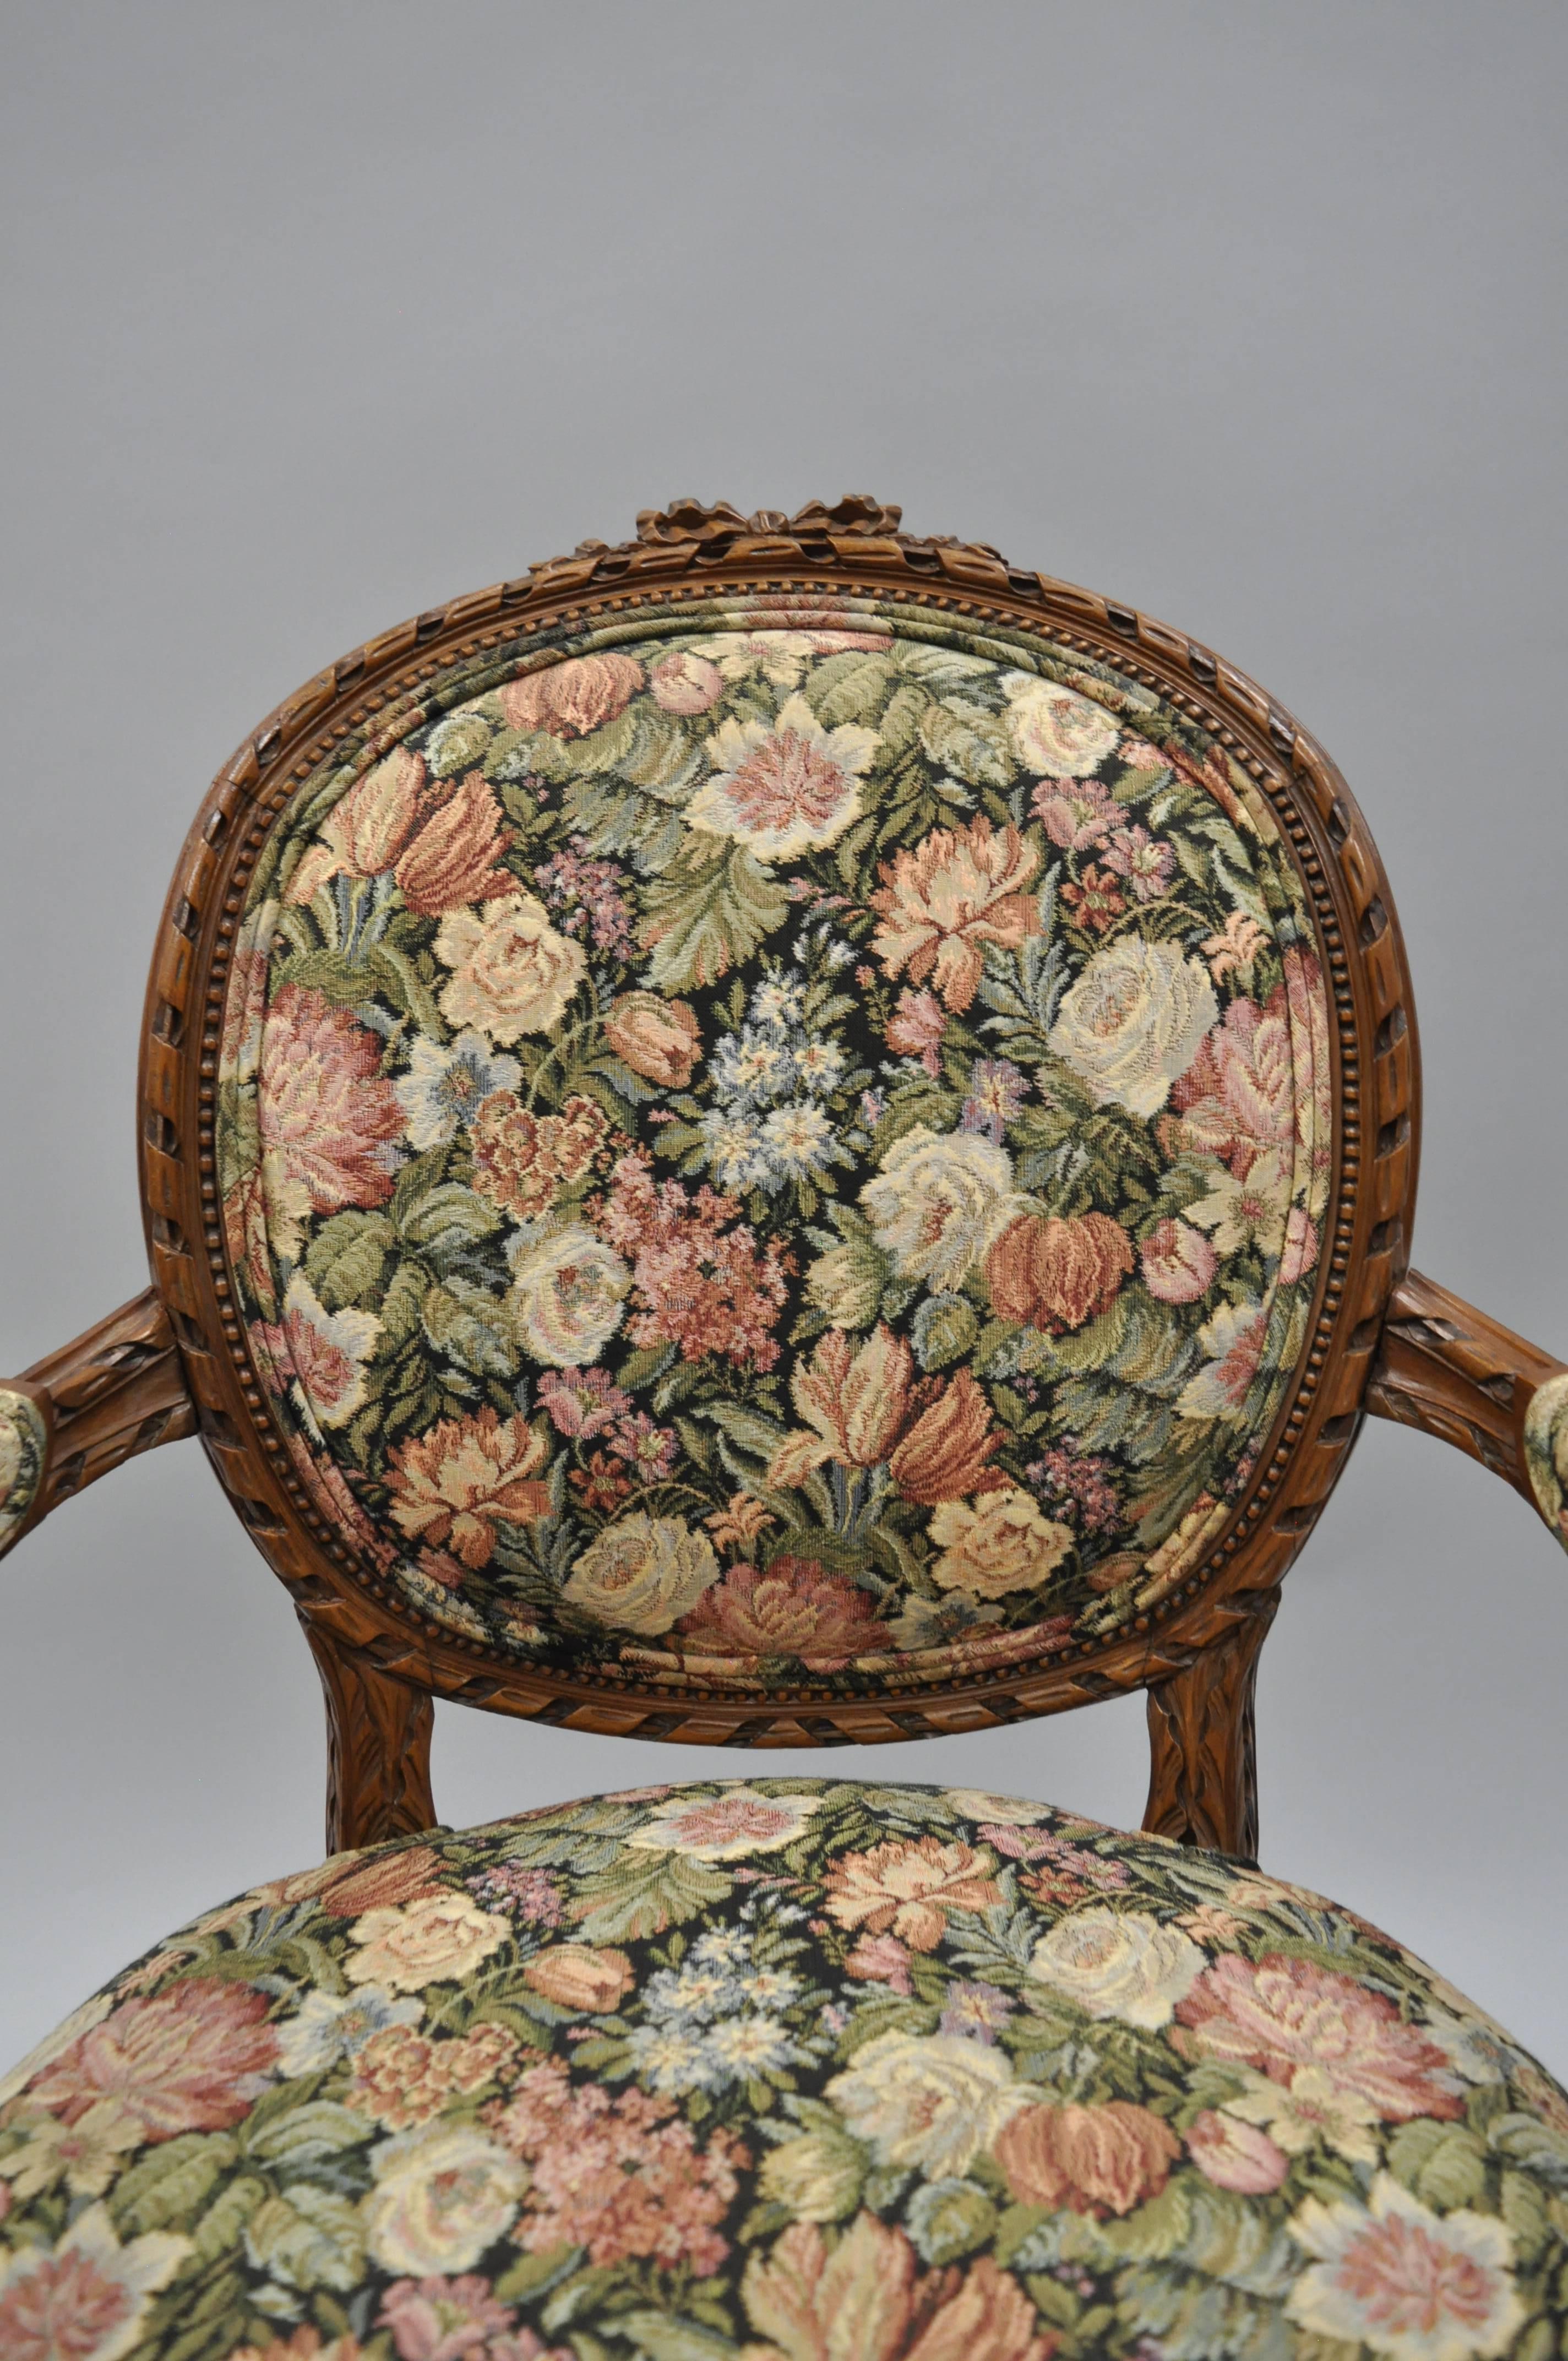 Pair of Early 20th Century French Country / Louis XV Style Finely Carved Walnut Armchairs with Round Backs. Chairs features ornately carved solid wood frames, cabriole legs, ribbon carved crests, carved round backs, and floral upholstered fabric.